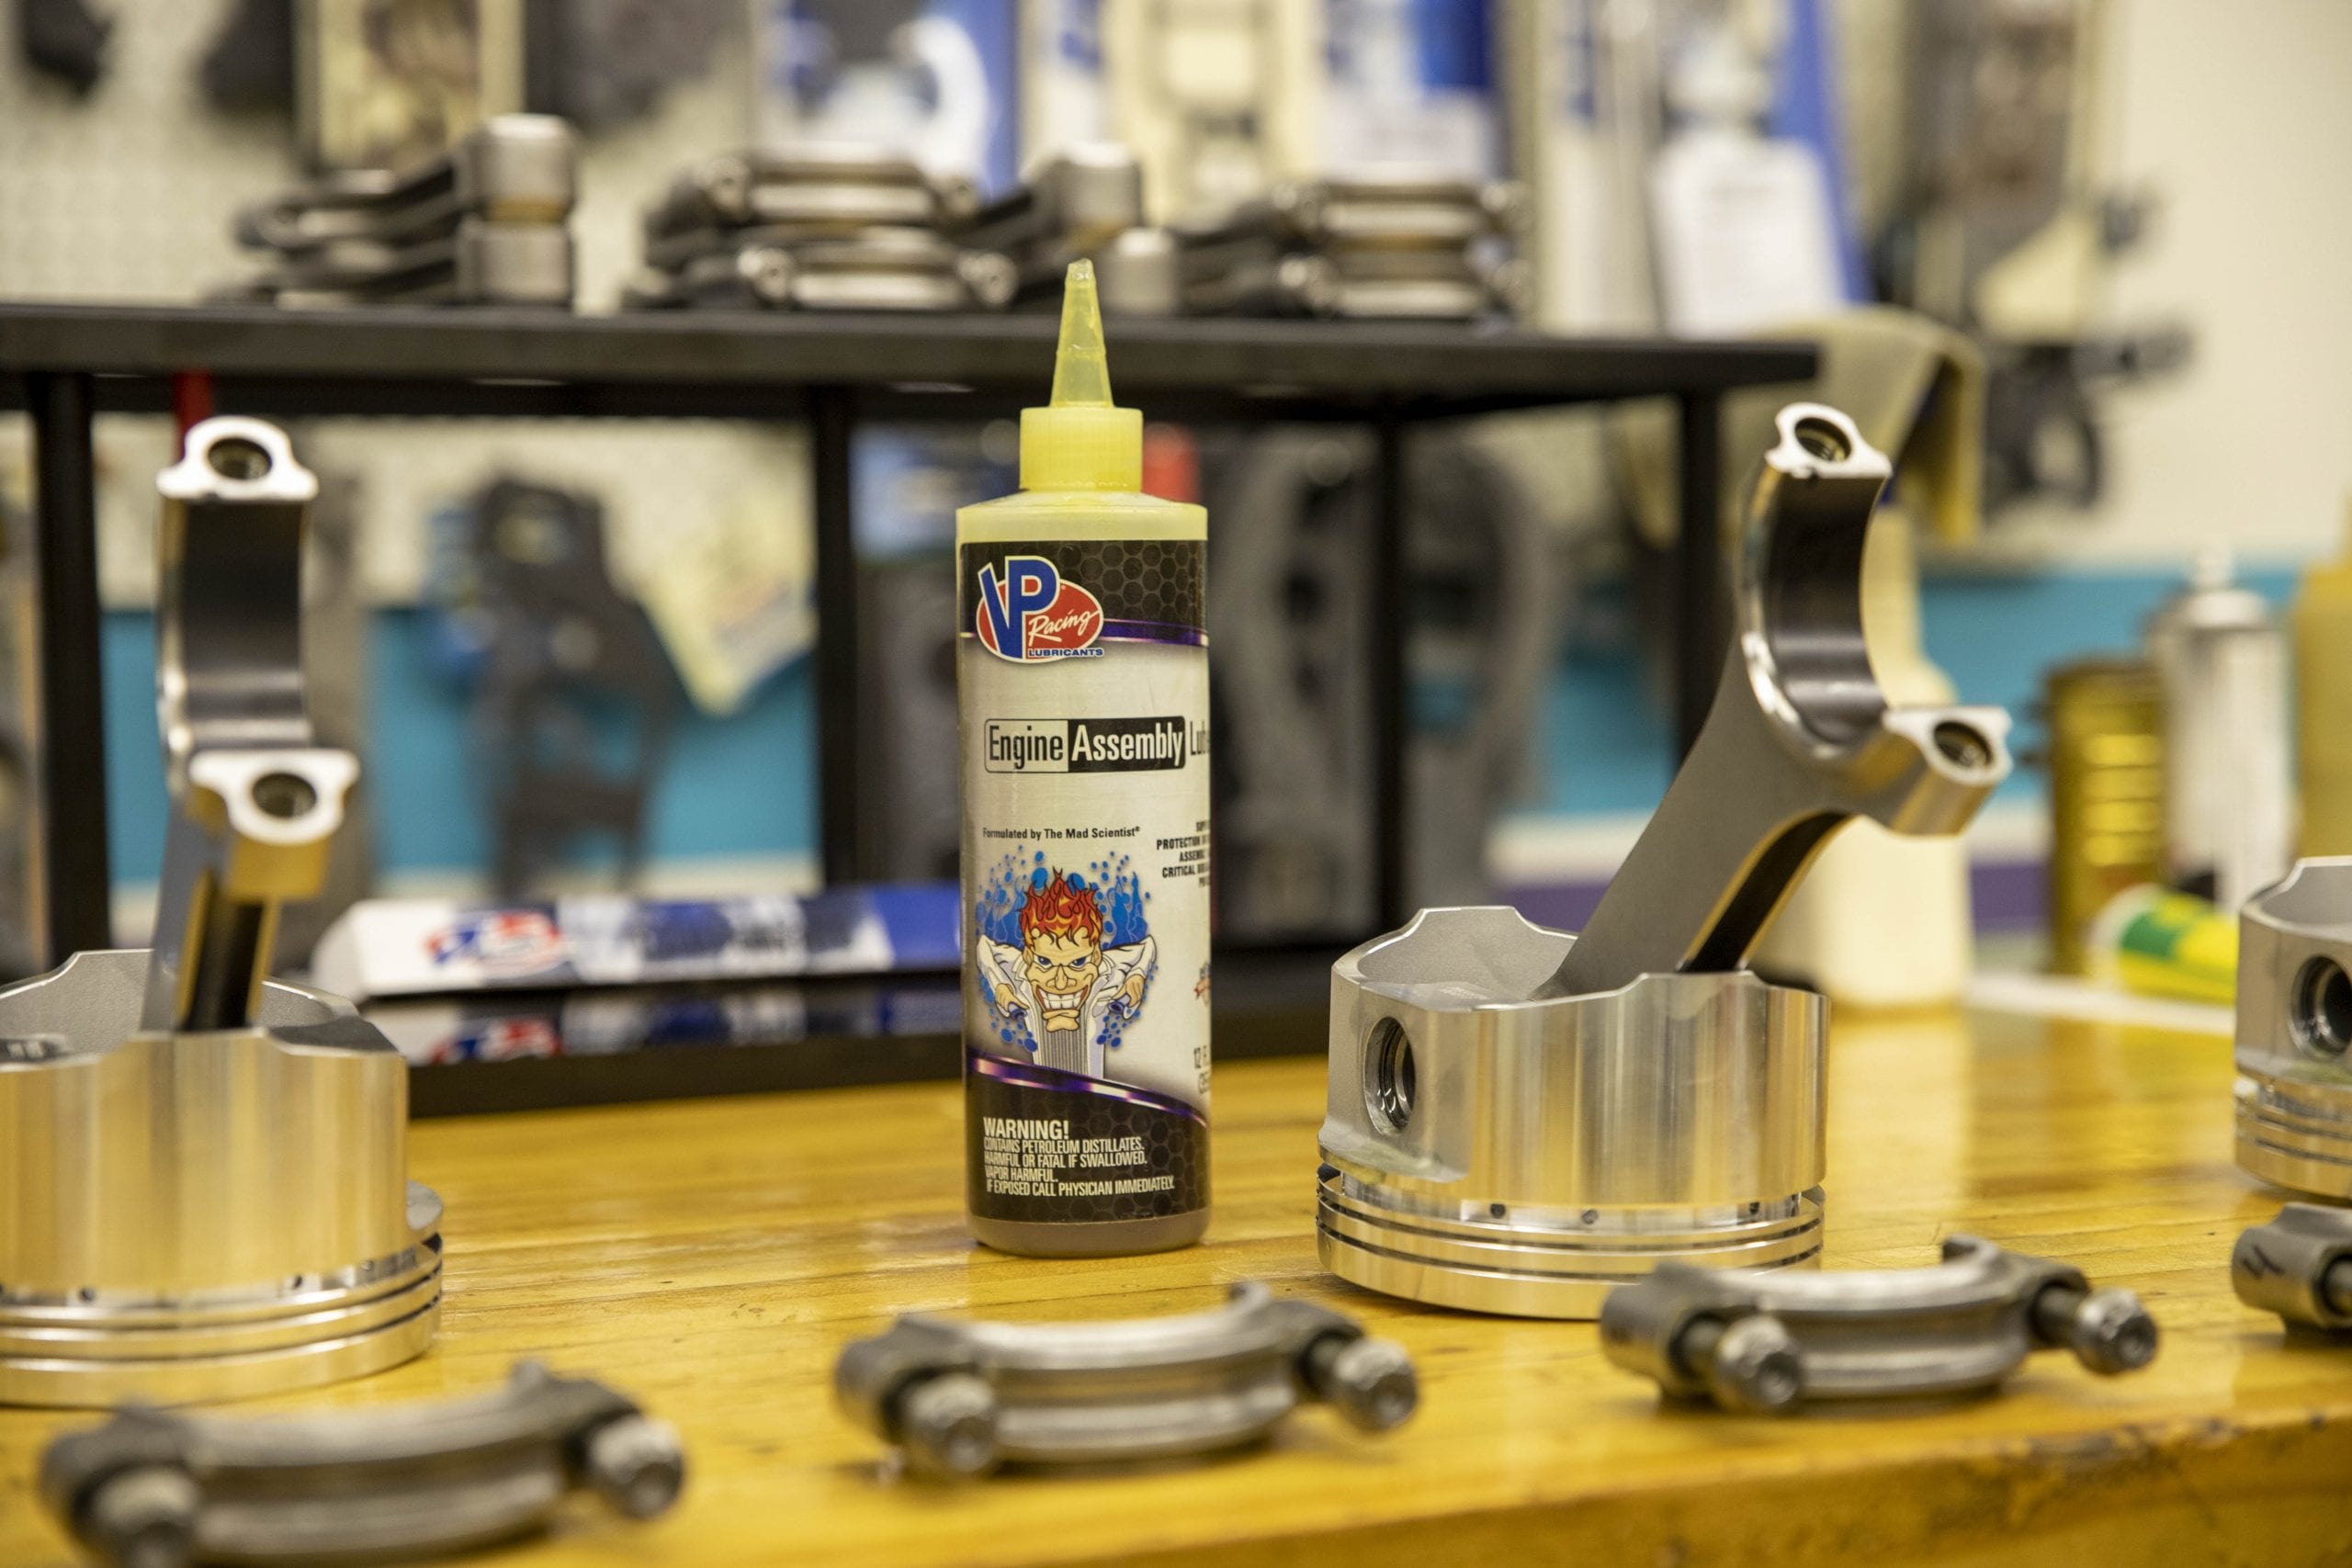 VP Engine Assembly Lube for high-performance engine builds